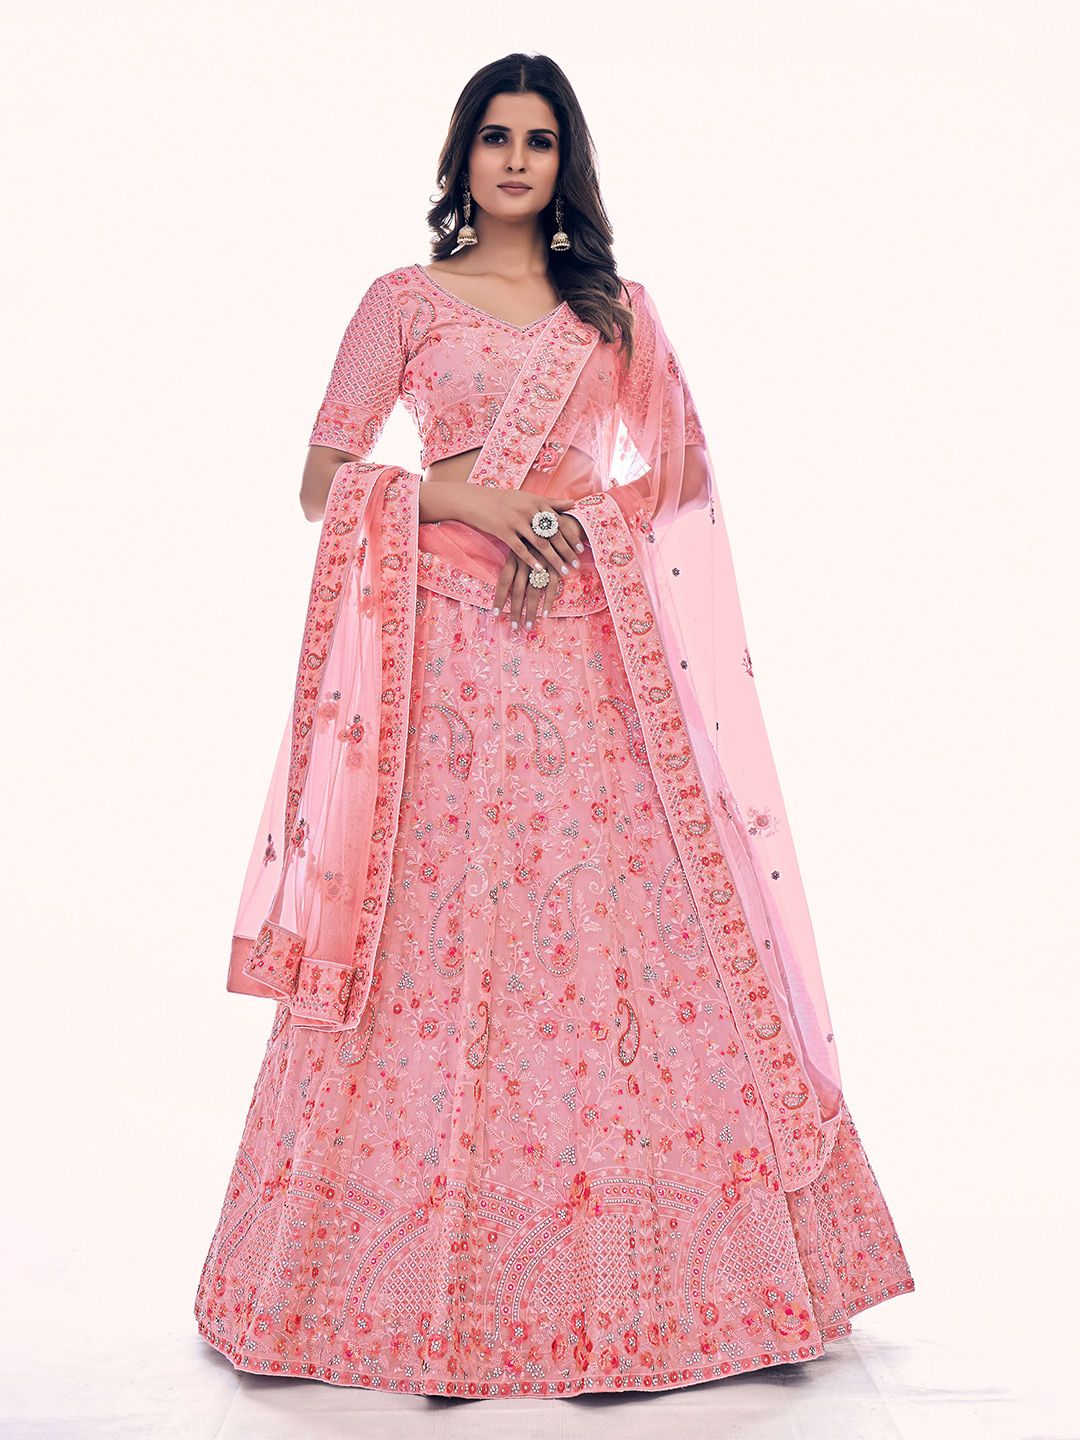 Fusionic Embroidered Beads & Stones Semi-Stitched Lehenga & Unstitched Blouse With Dupatta Price in India